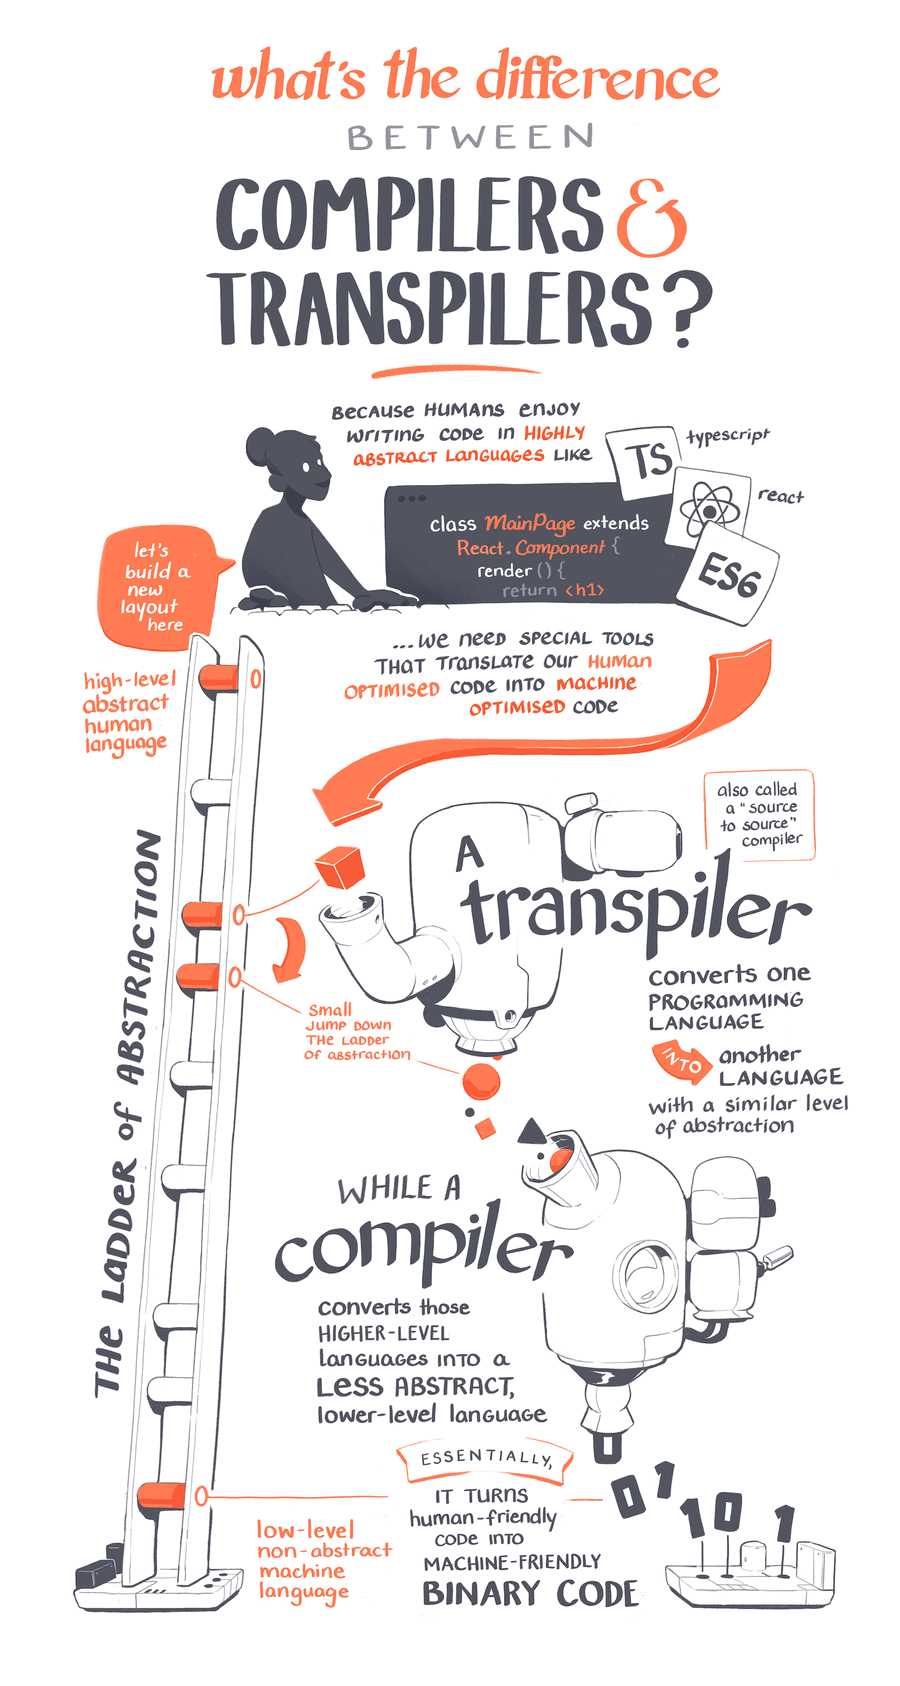 Compilers and Transpilers